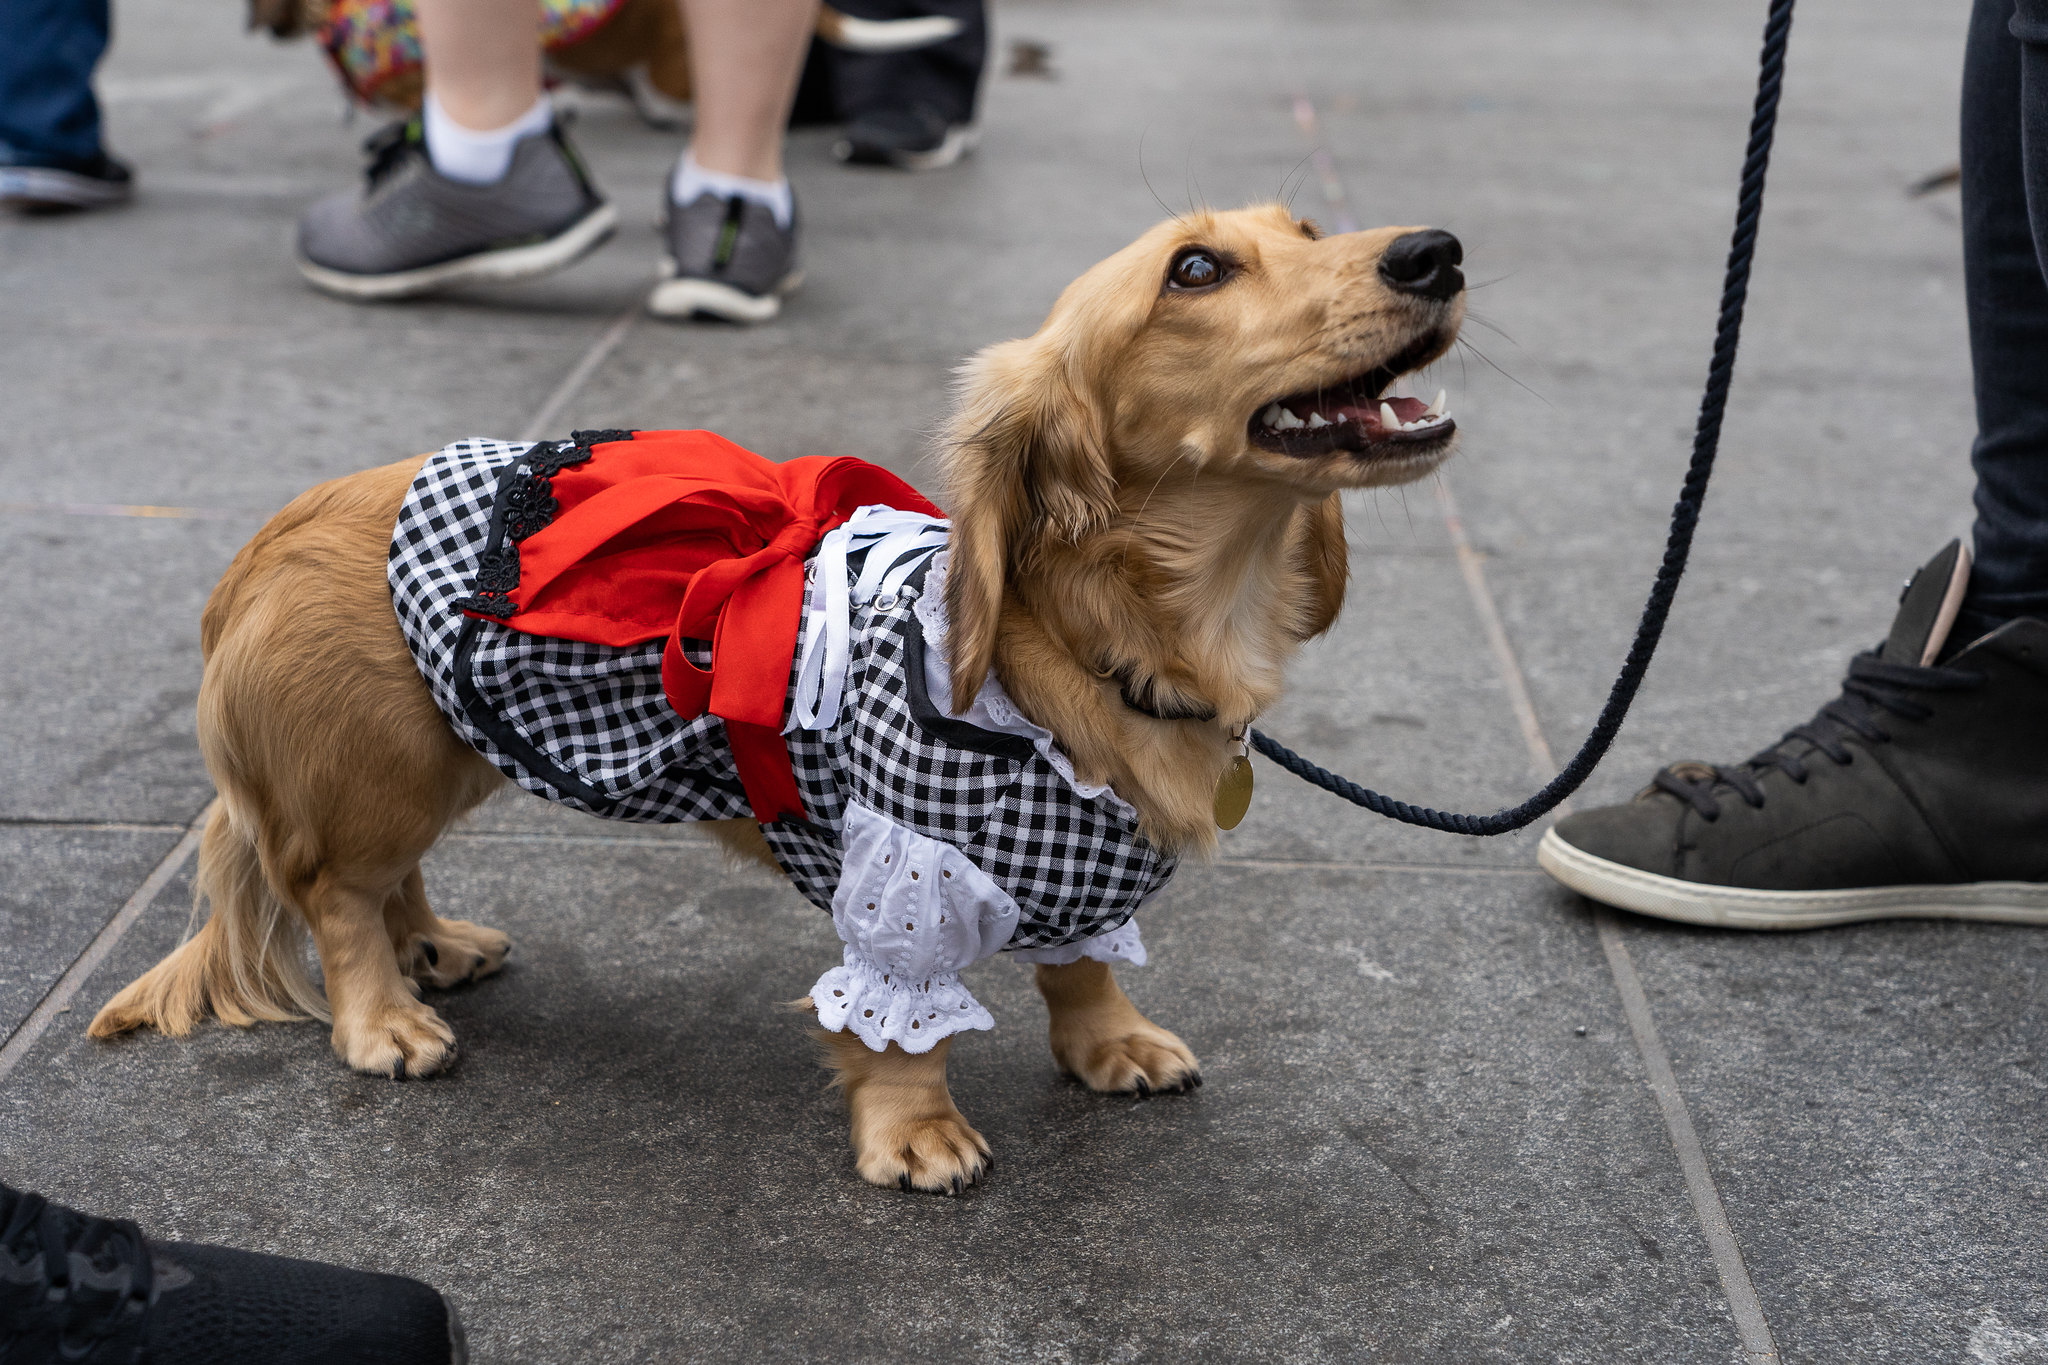 a dachshund wearing a black and white checkered outfit